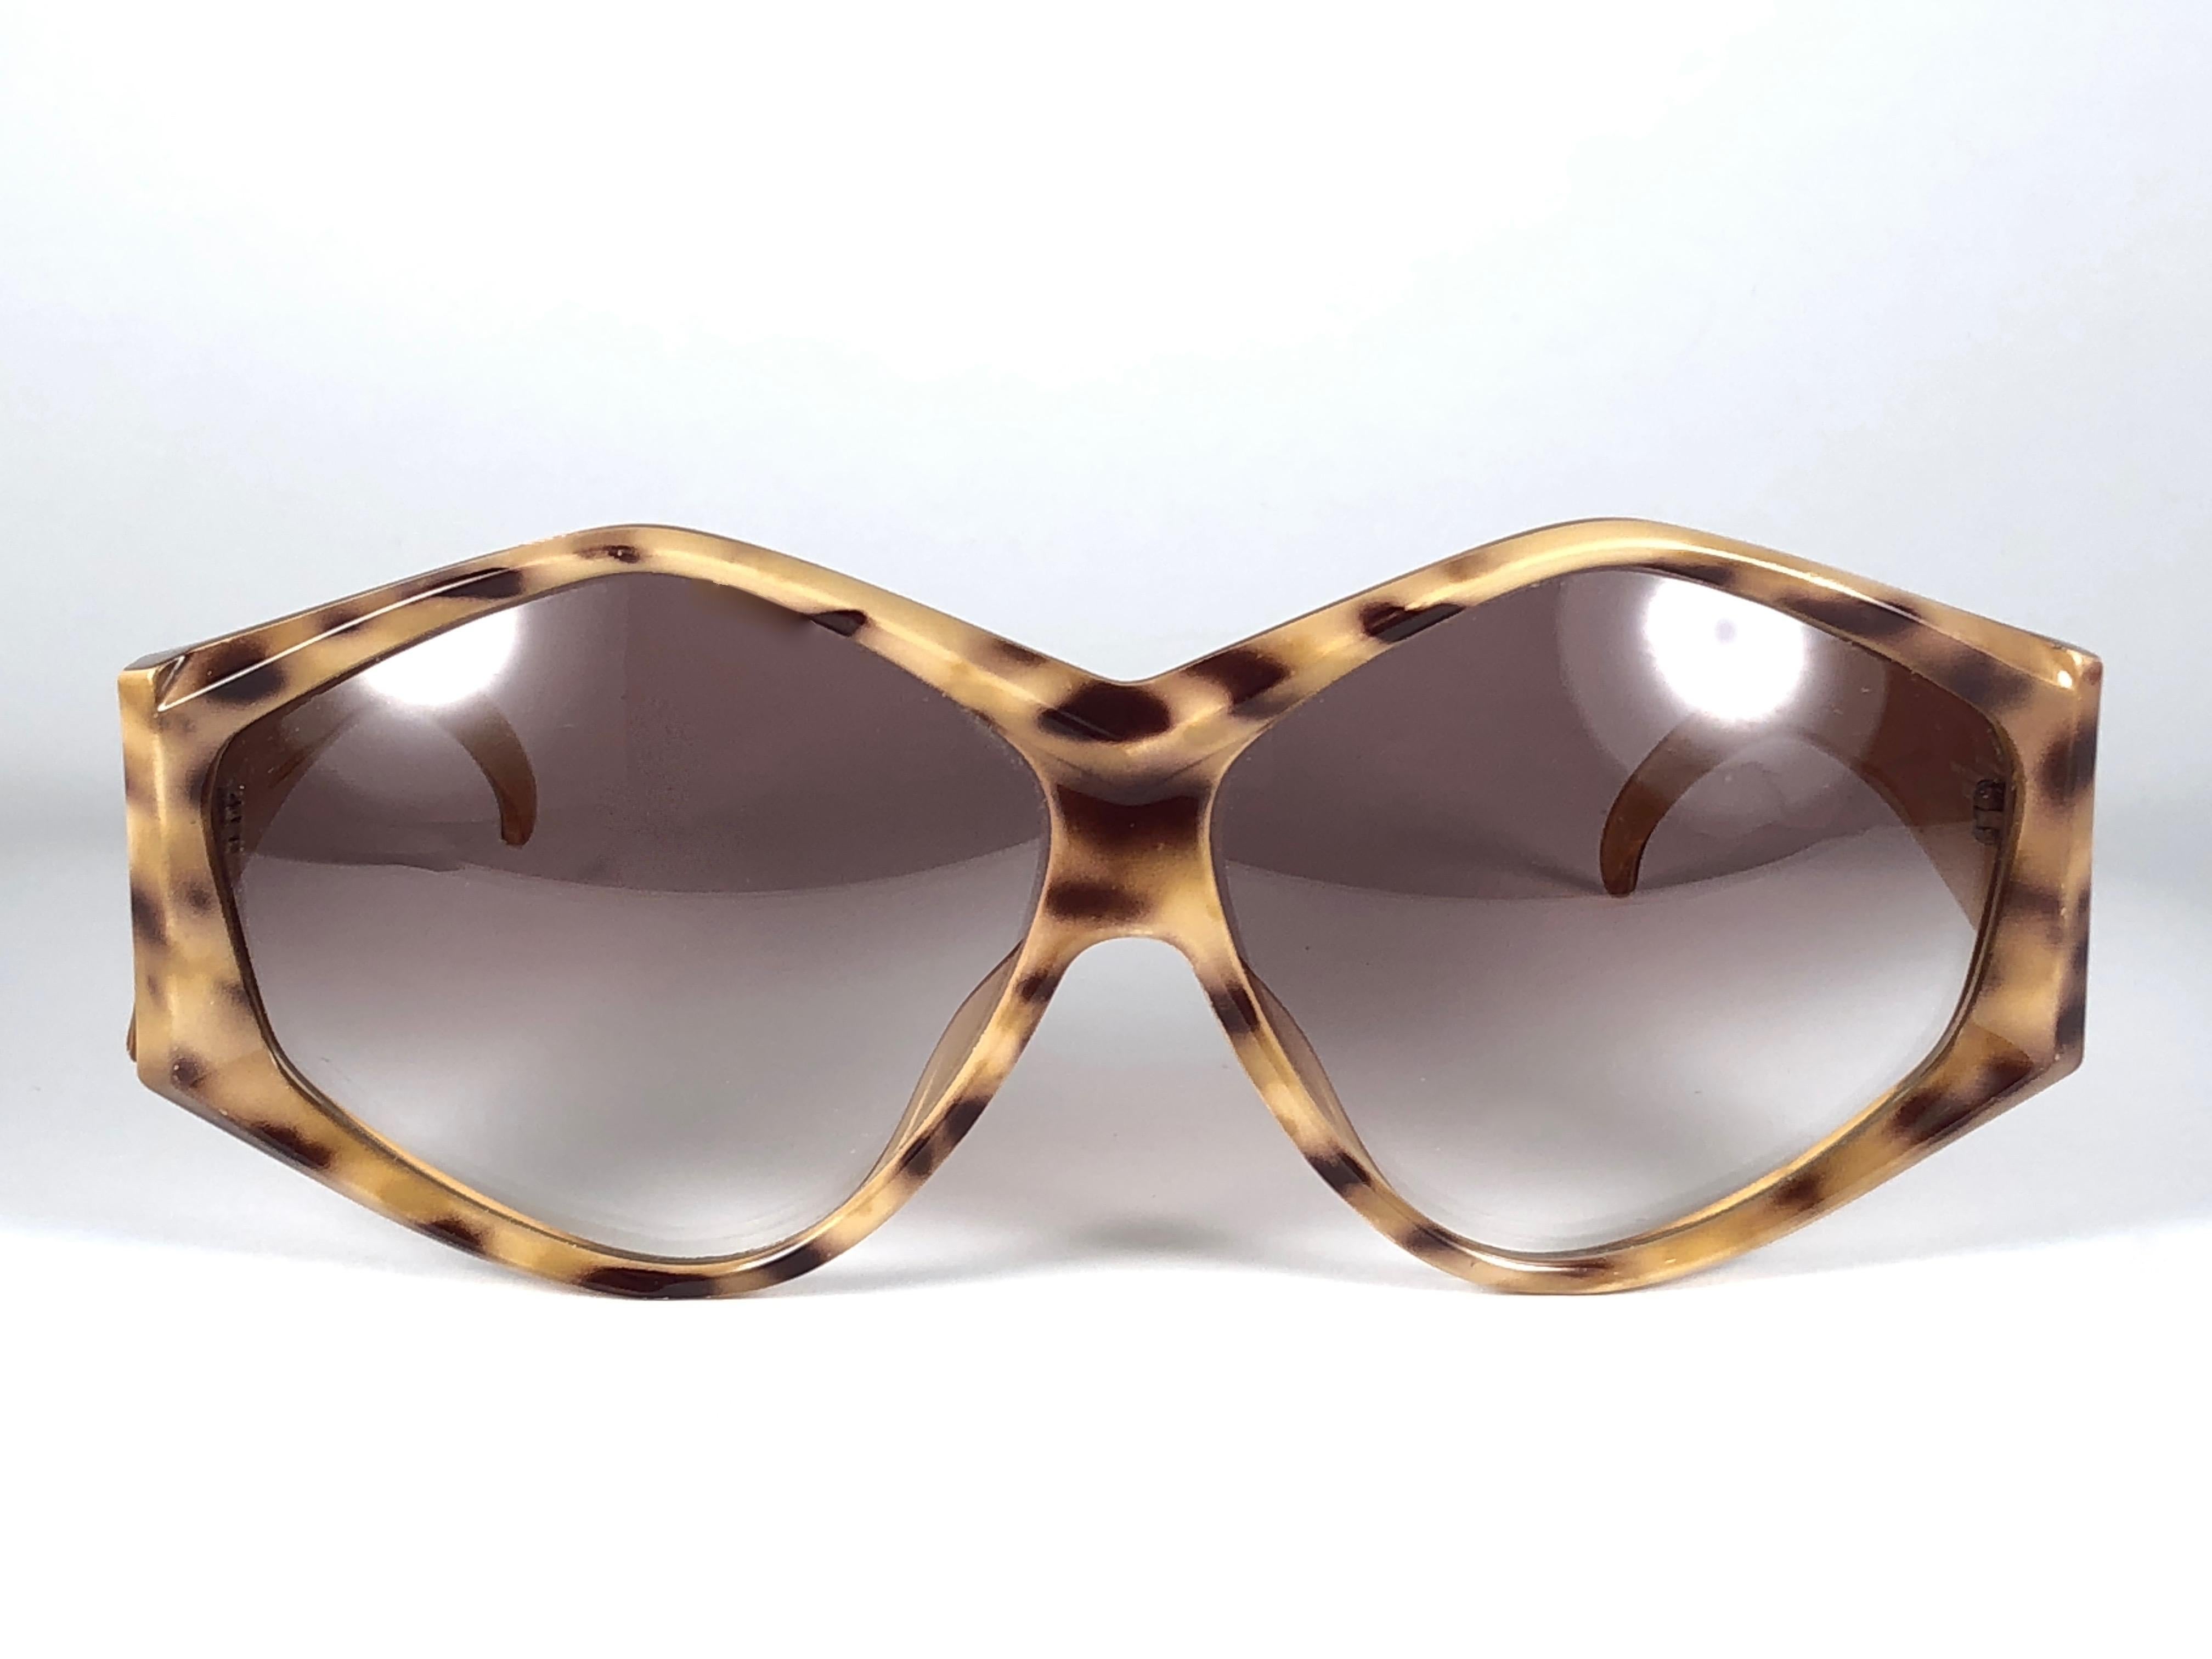 New Vintage Christian Dior 2230 10 leopard Origami frame with spotless light brown gradient lenses. 

Made in Germany.
 
Produced and design in 1970's.

A collector’s piece!

This item may show minor sign of wear due to storage. Comes with its